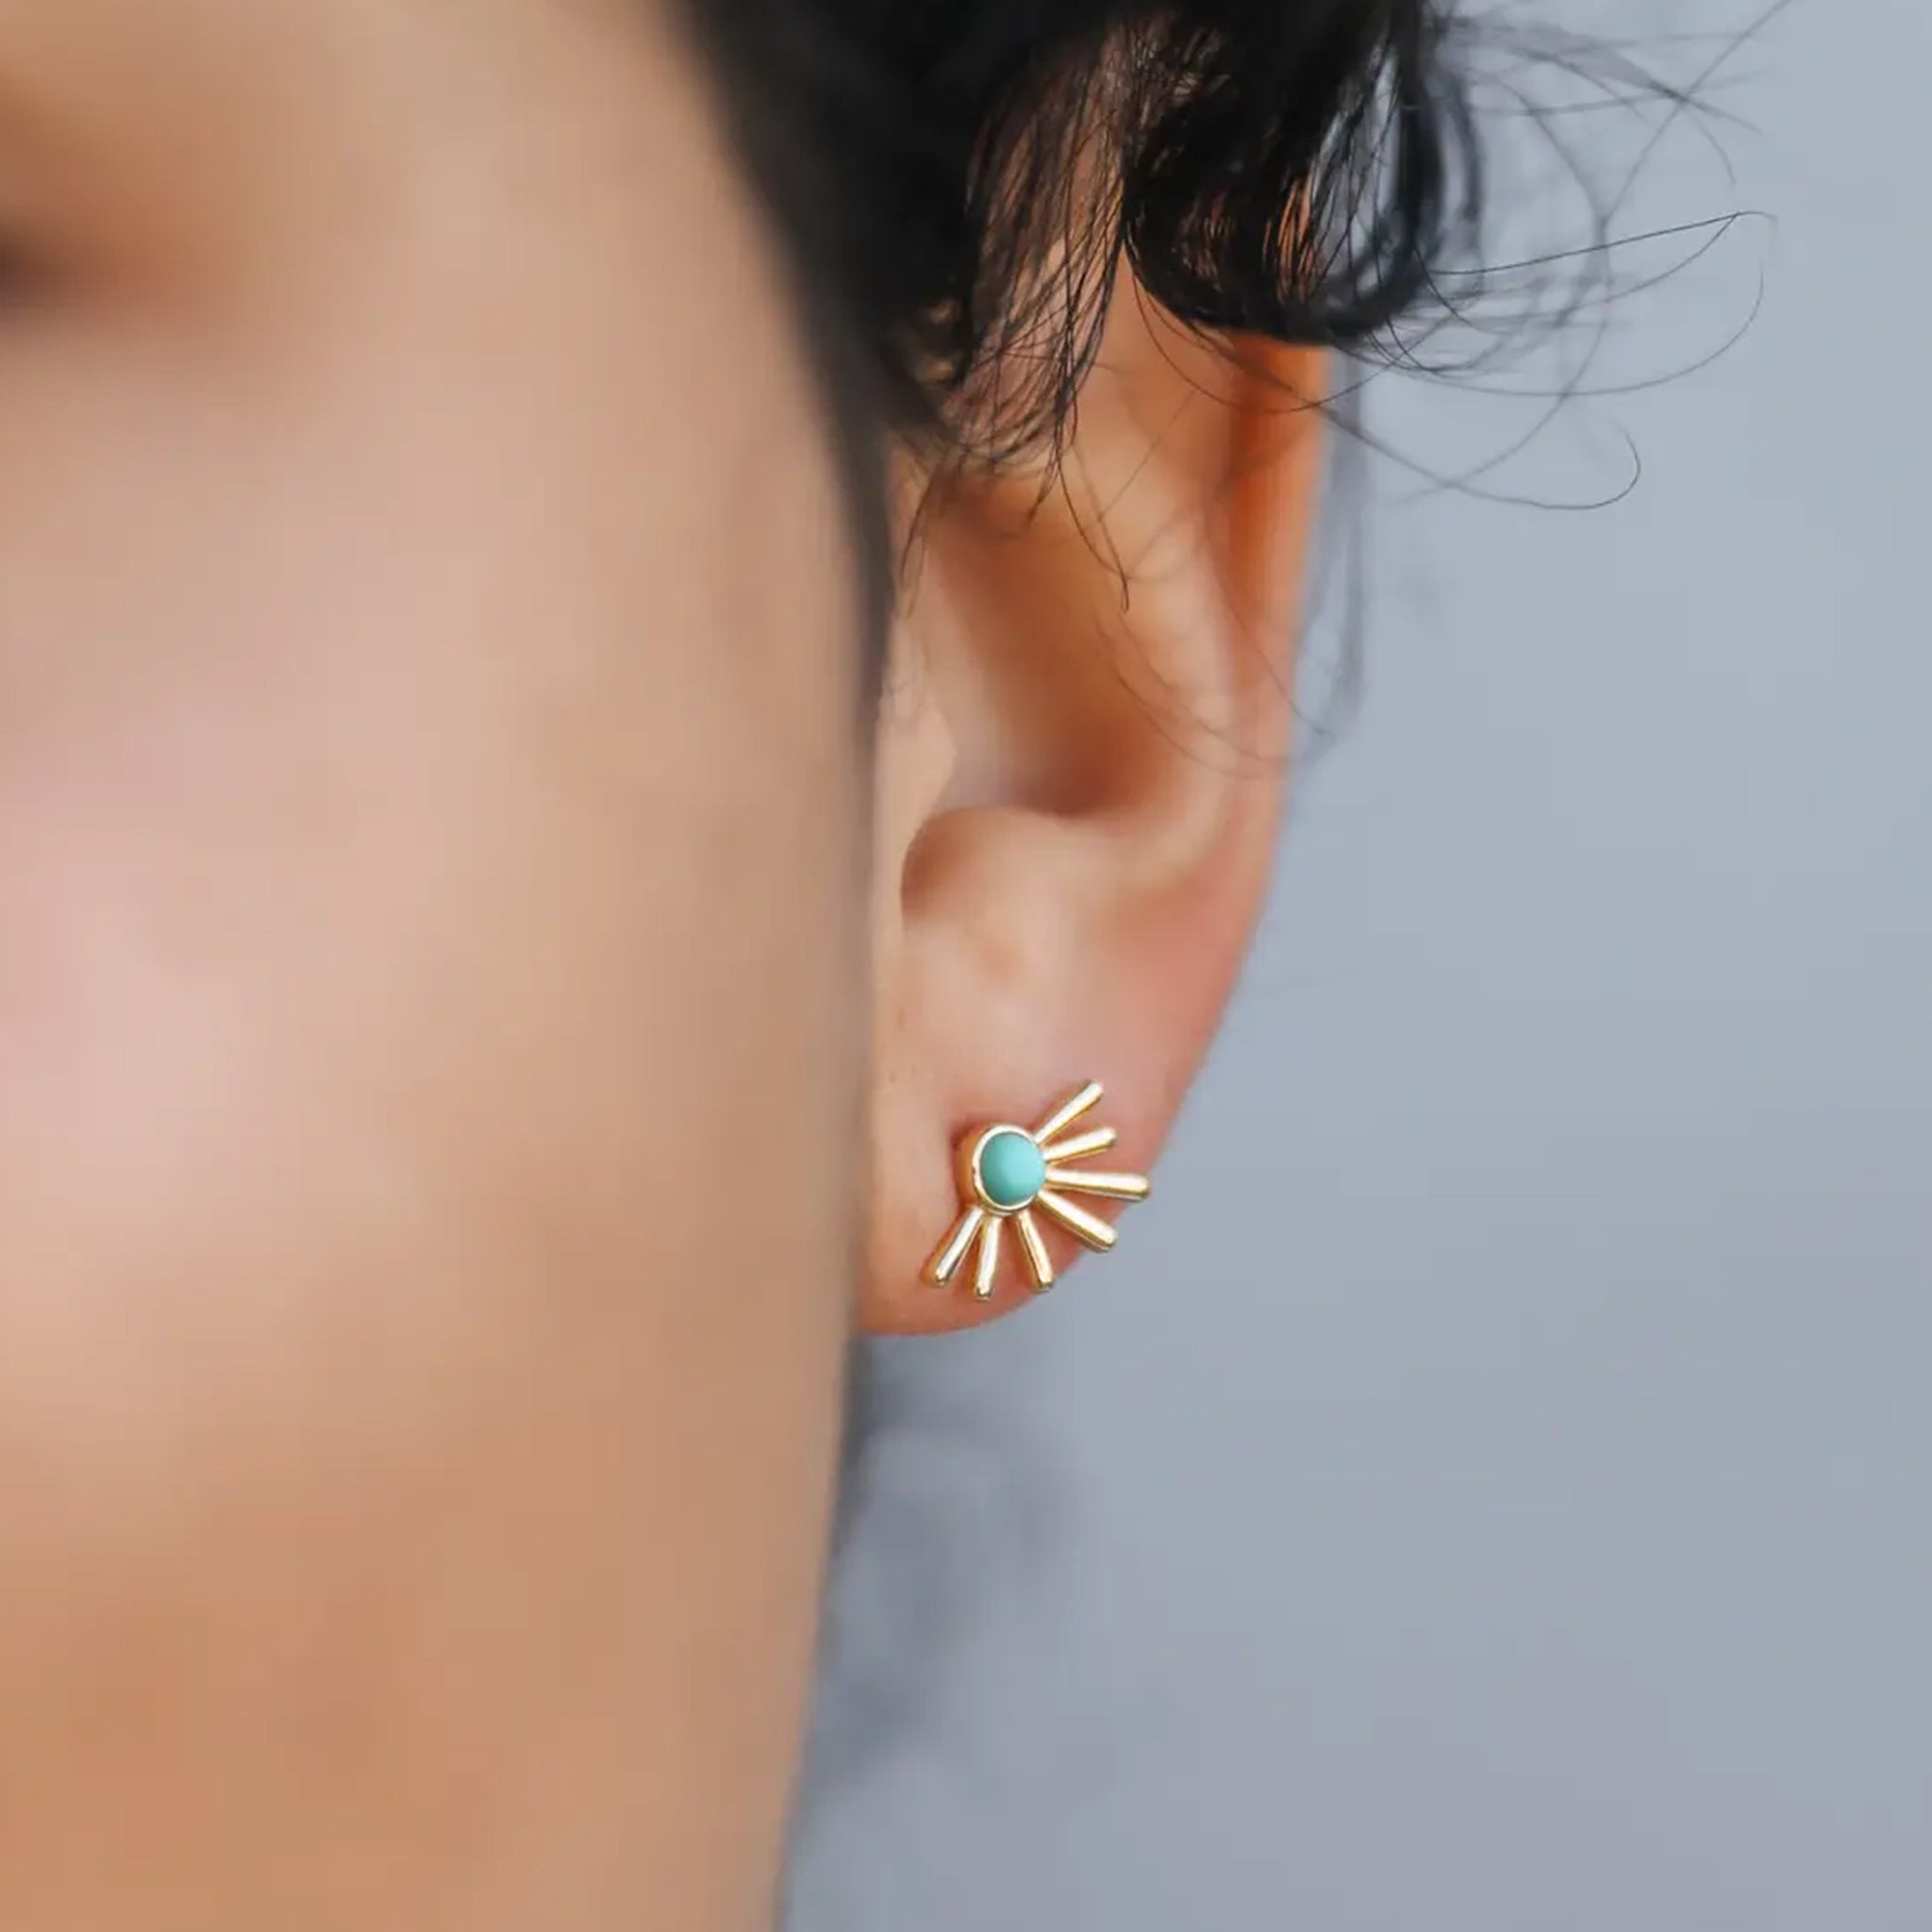 A pair of sunburst shape gold earrings with a turquoise stone in the center.